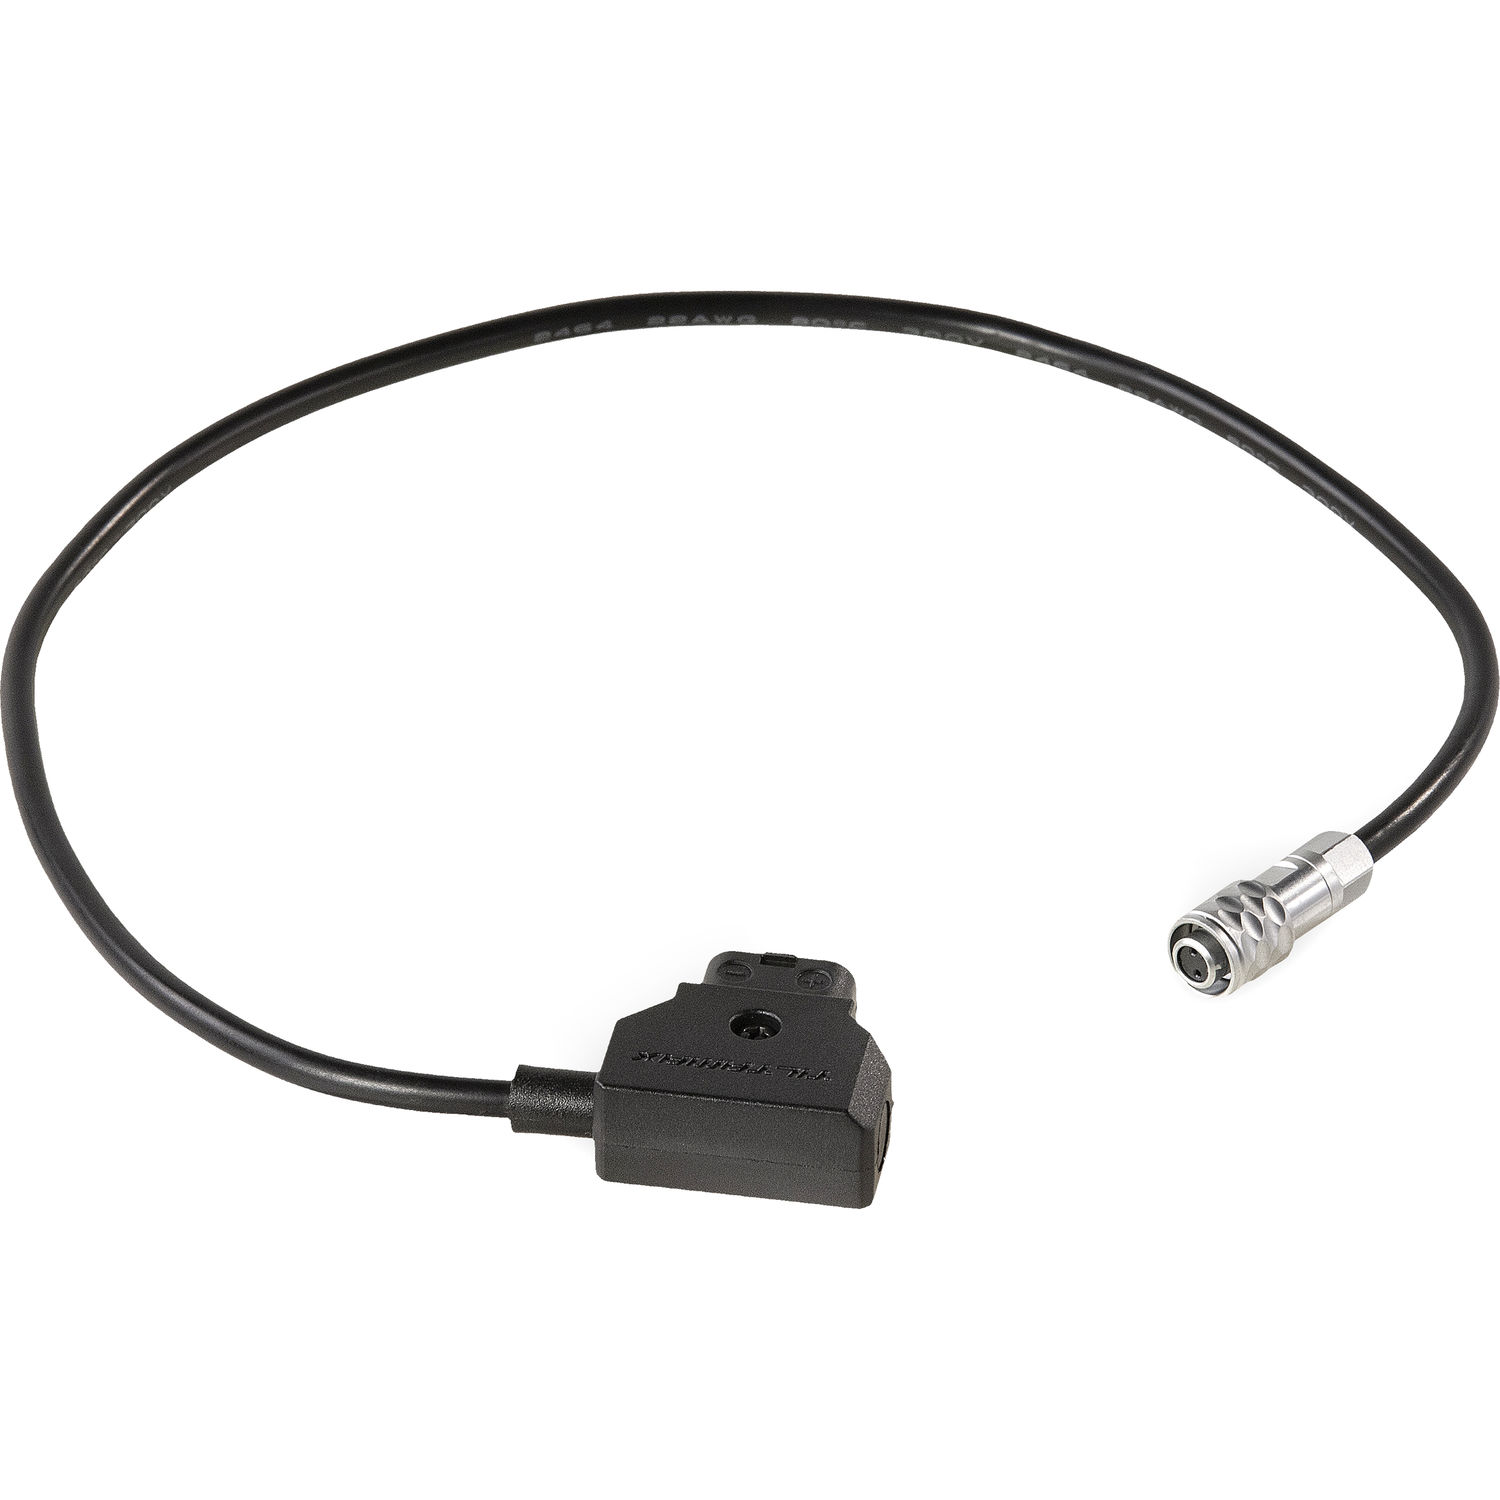 Tilta D-Tap to 2-Pin Power Cable for BMPCC 4K Cameras